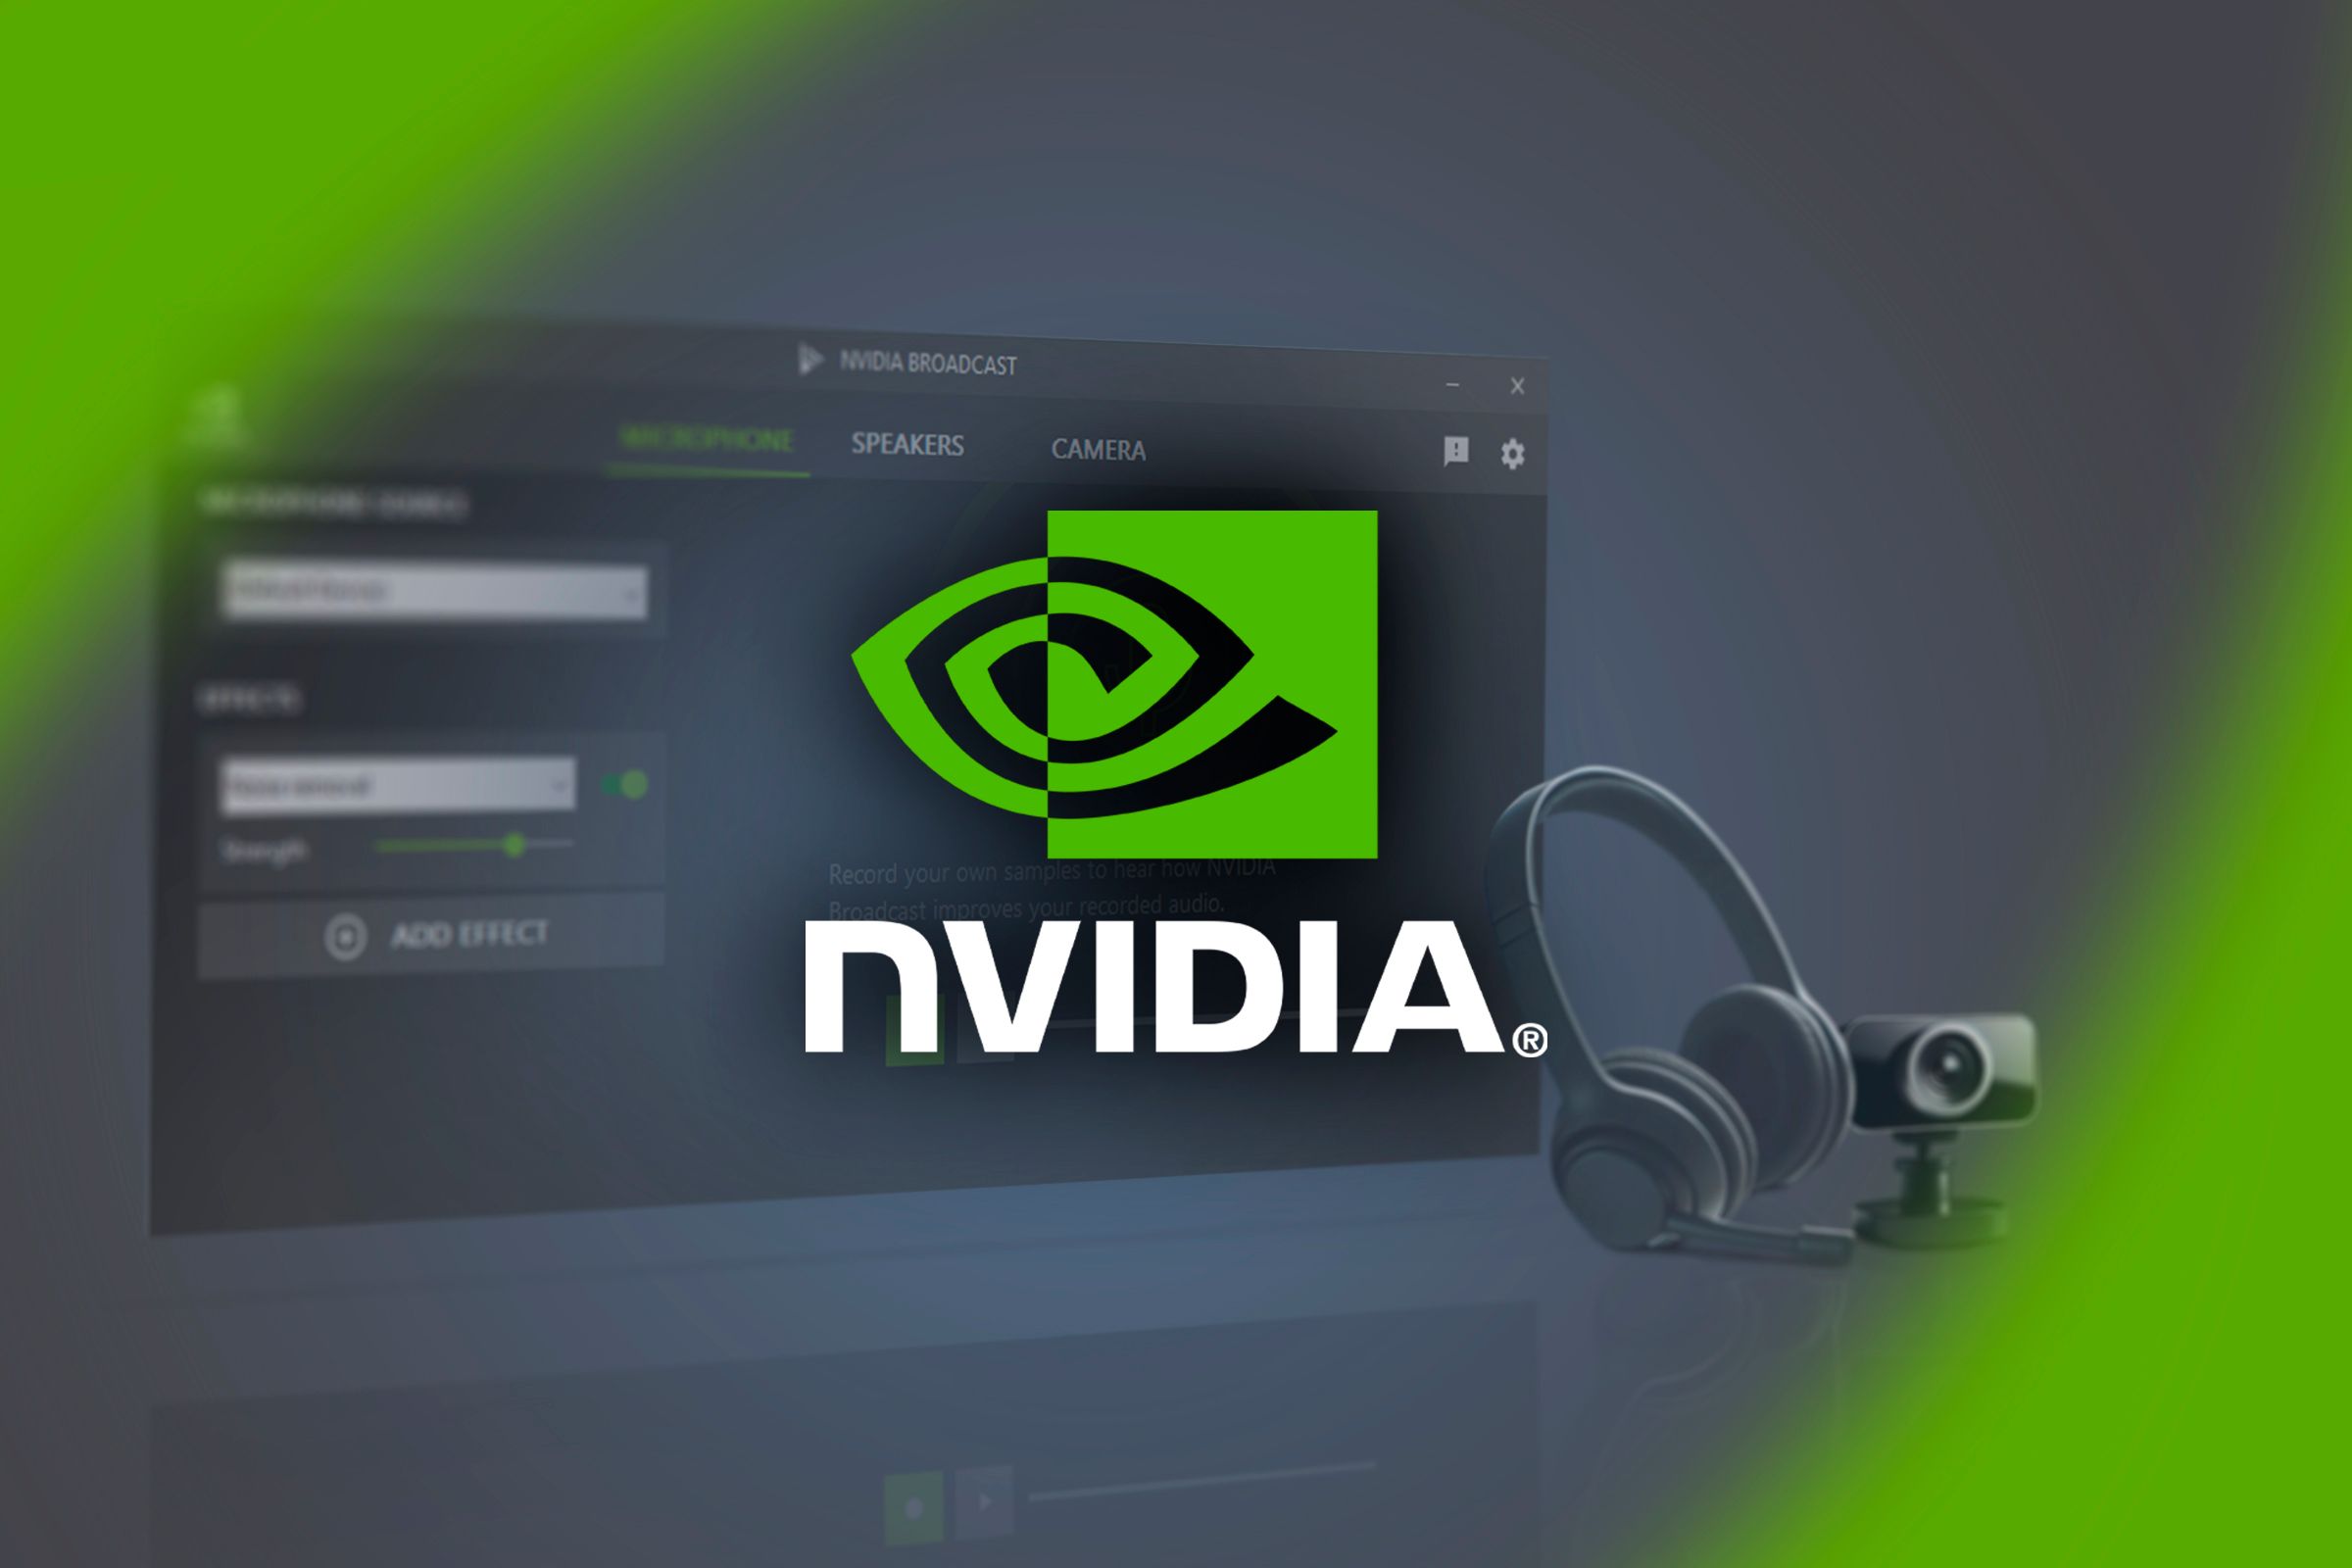 The NVIDIA logo with the NVIDIA Broadcast window open in the background. 